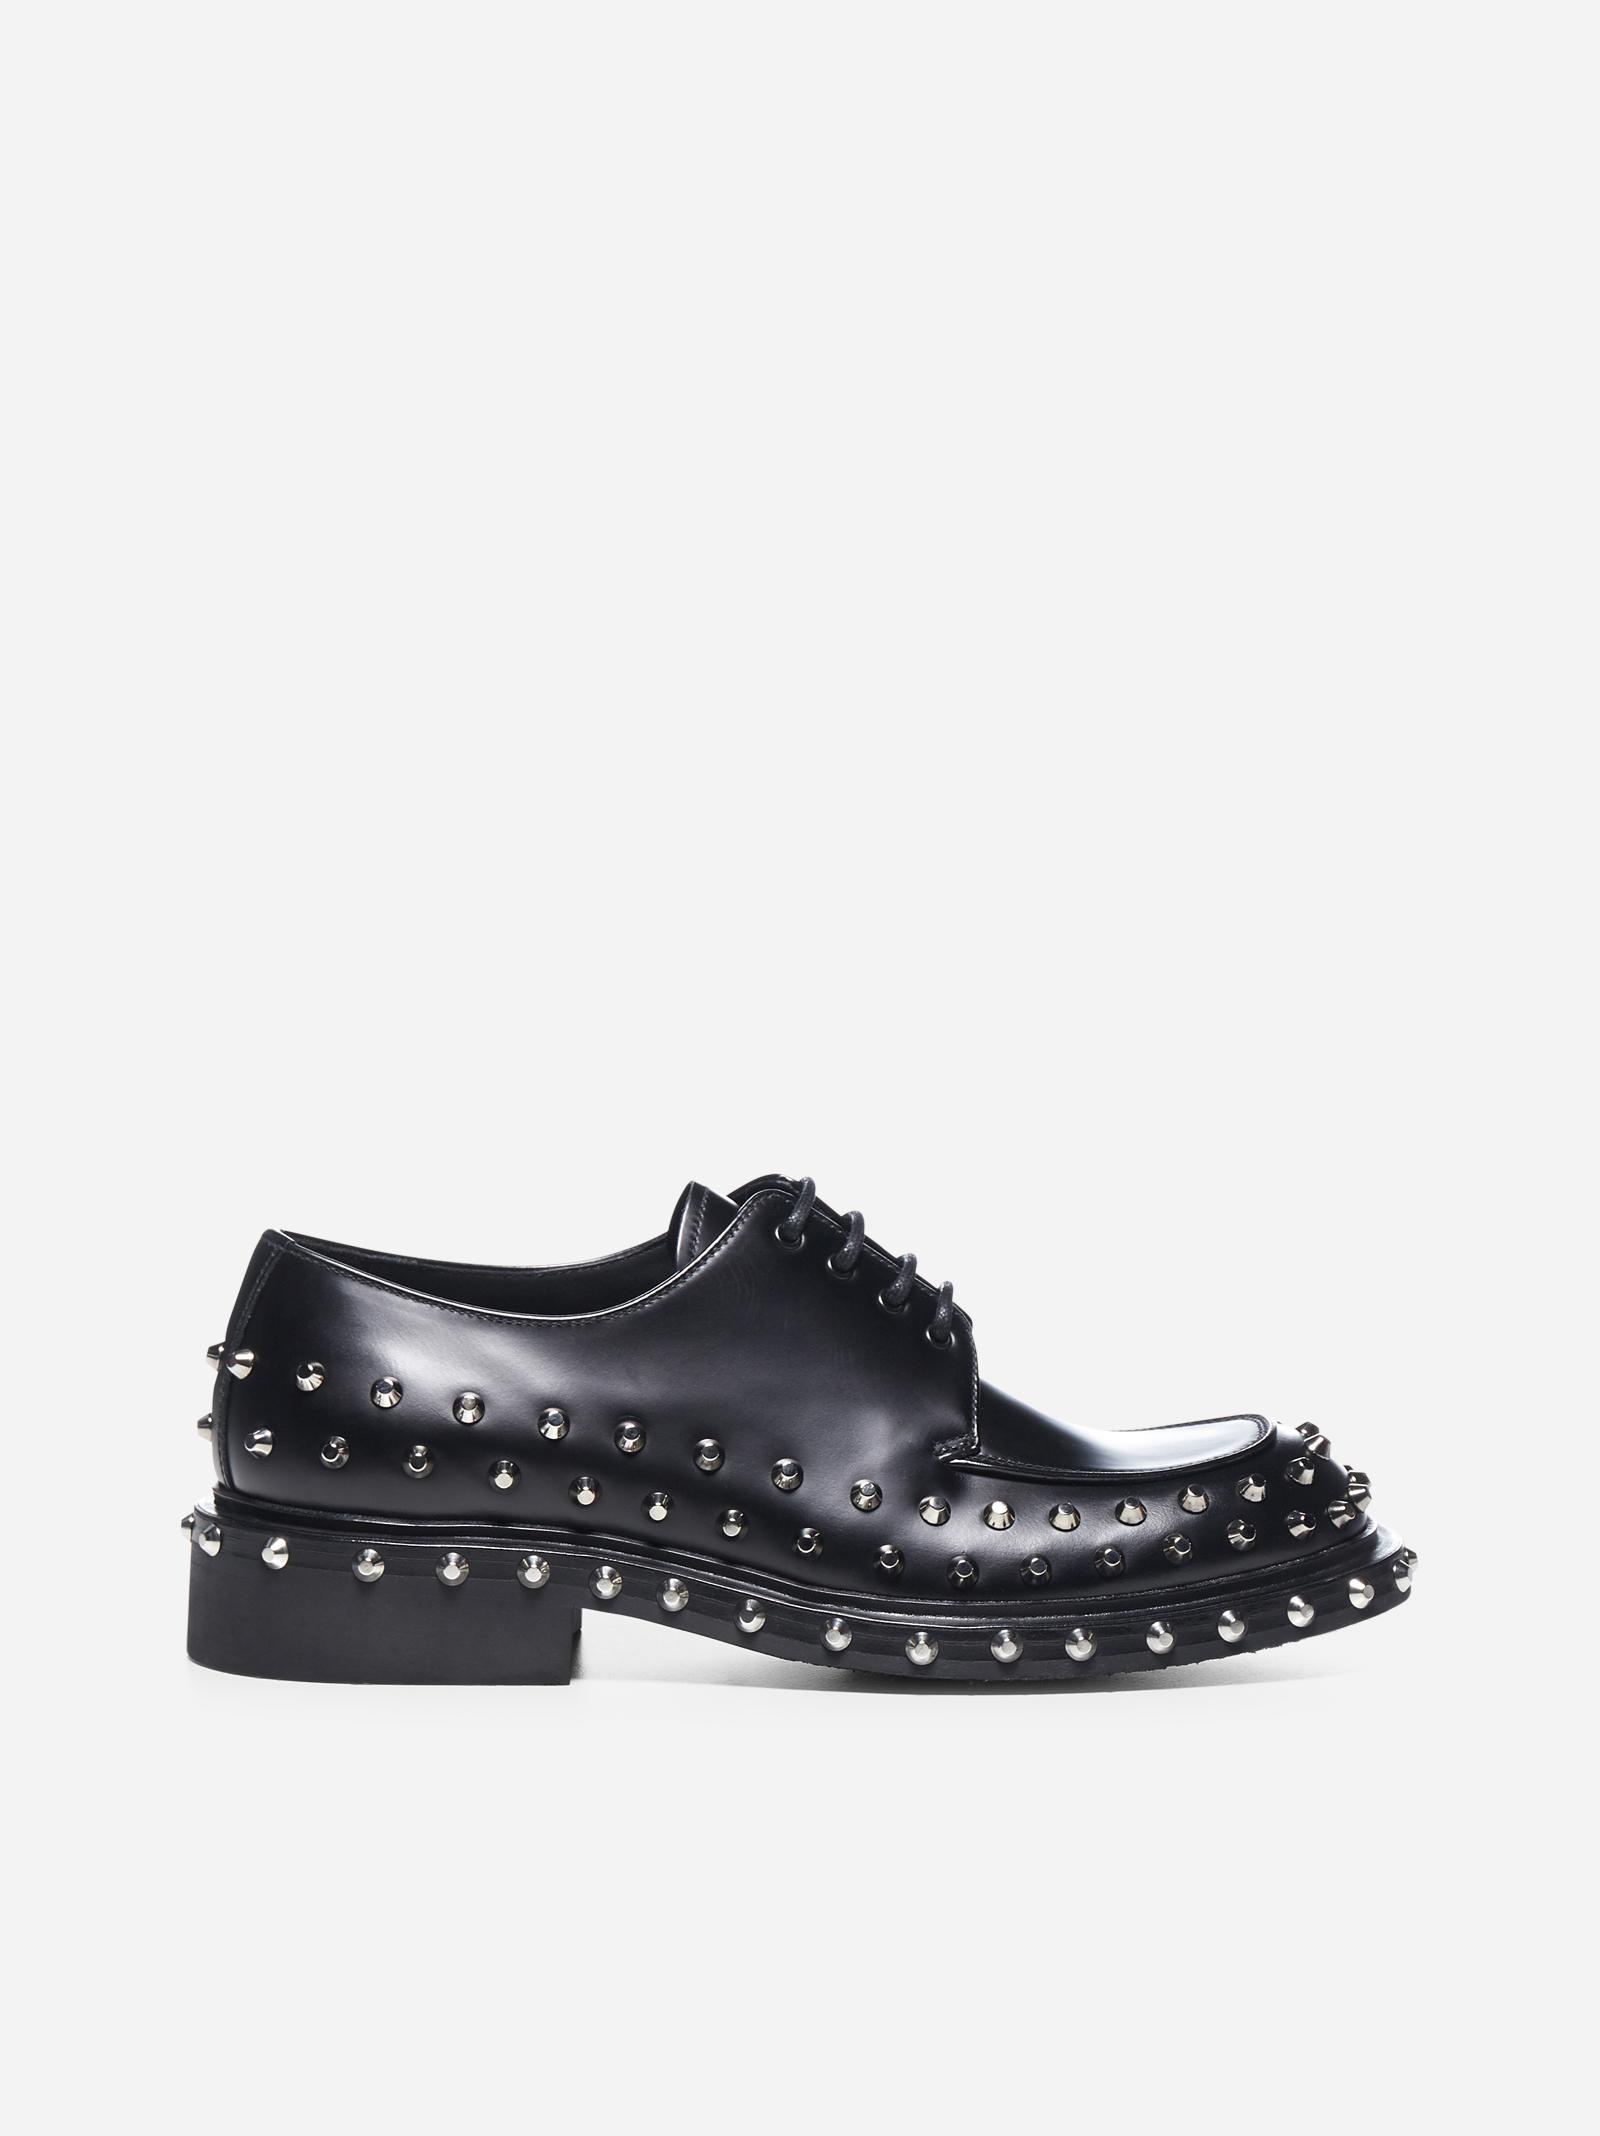 Prada Leather Lace-up Studded Shoes in Black for Men - Save 60% - Lyst